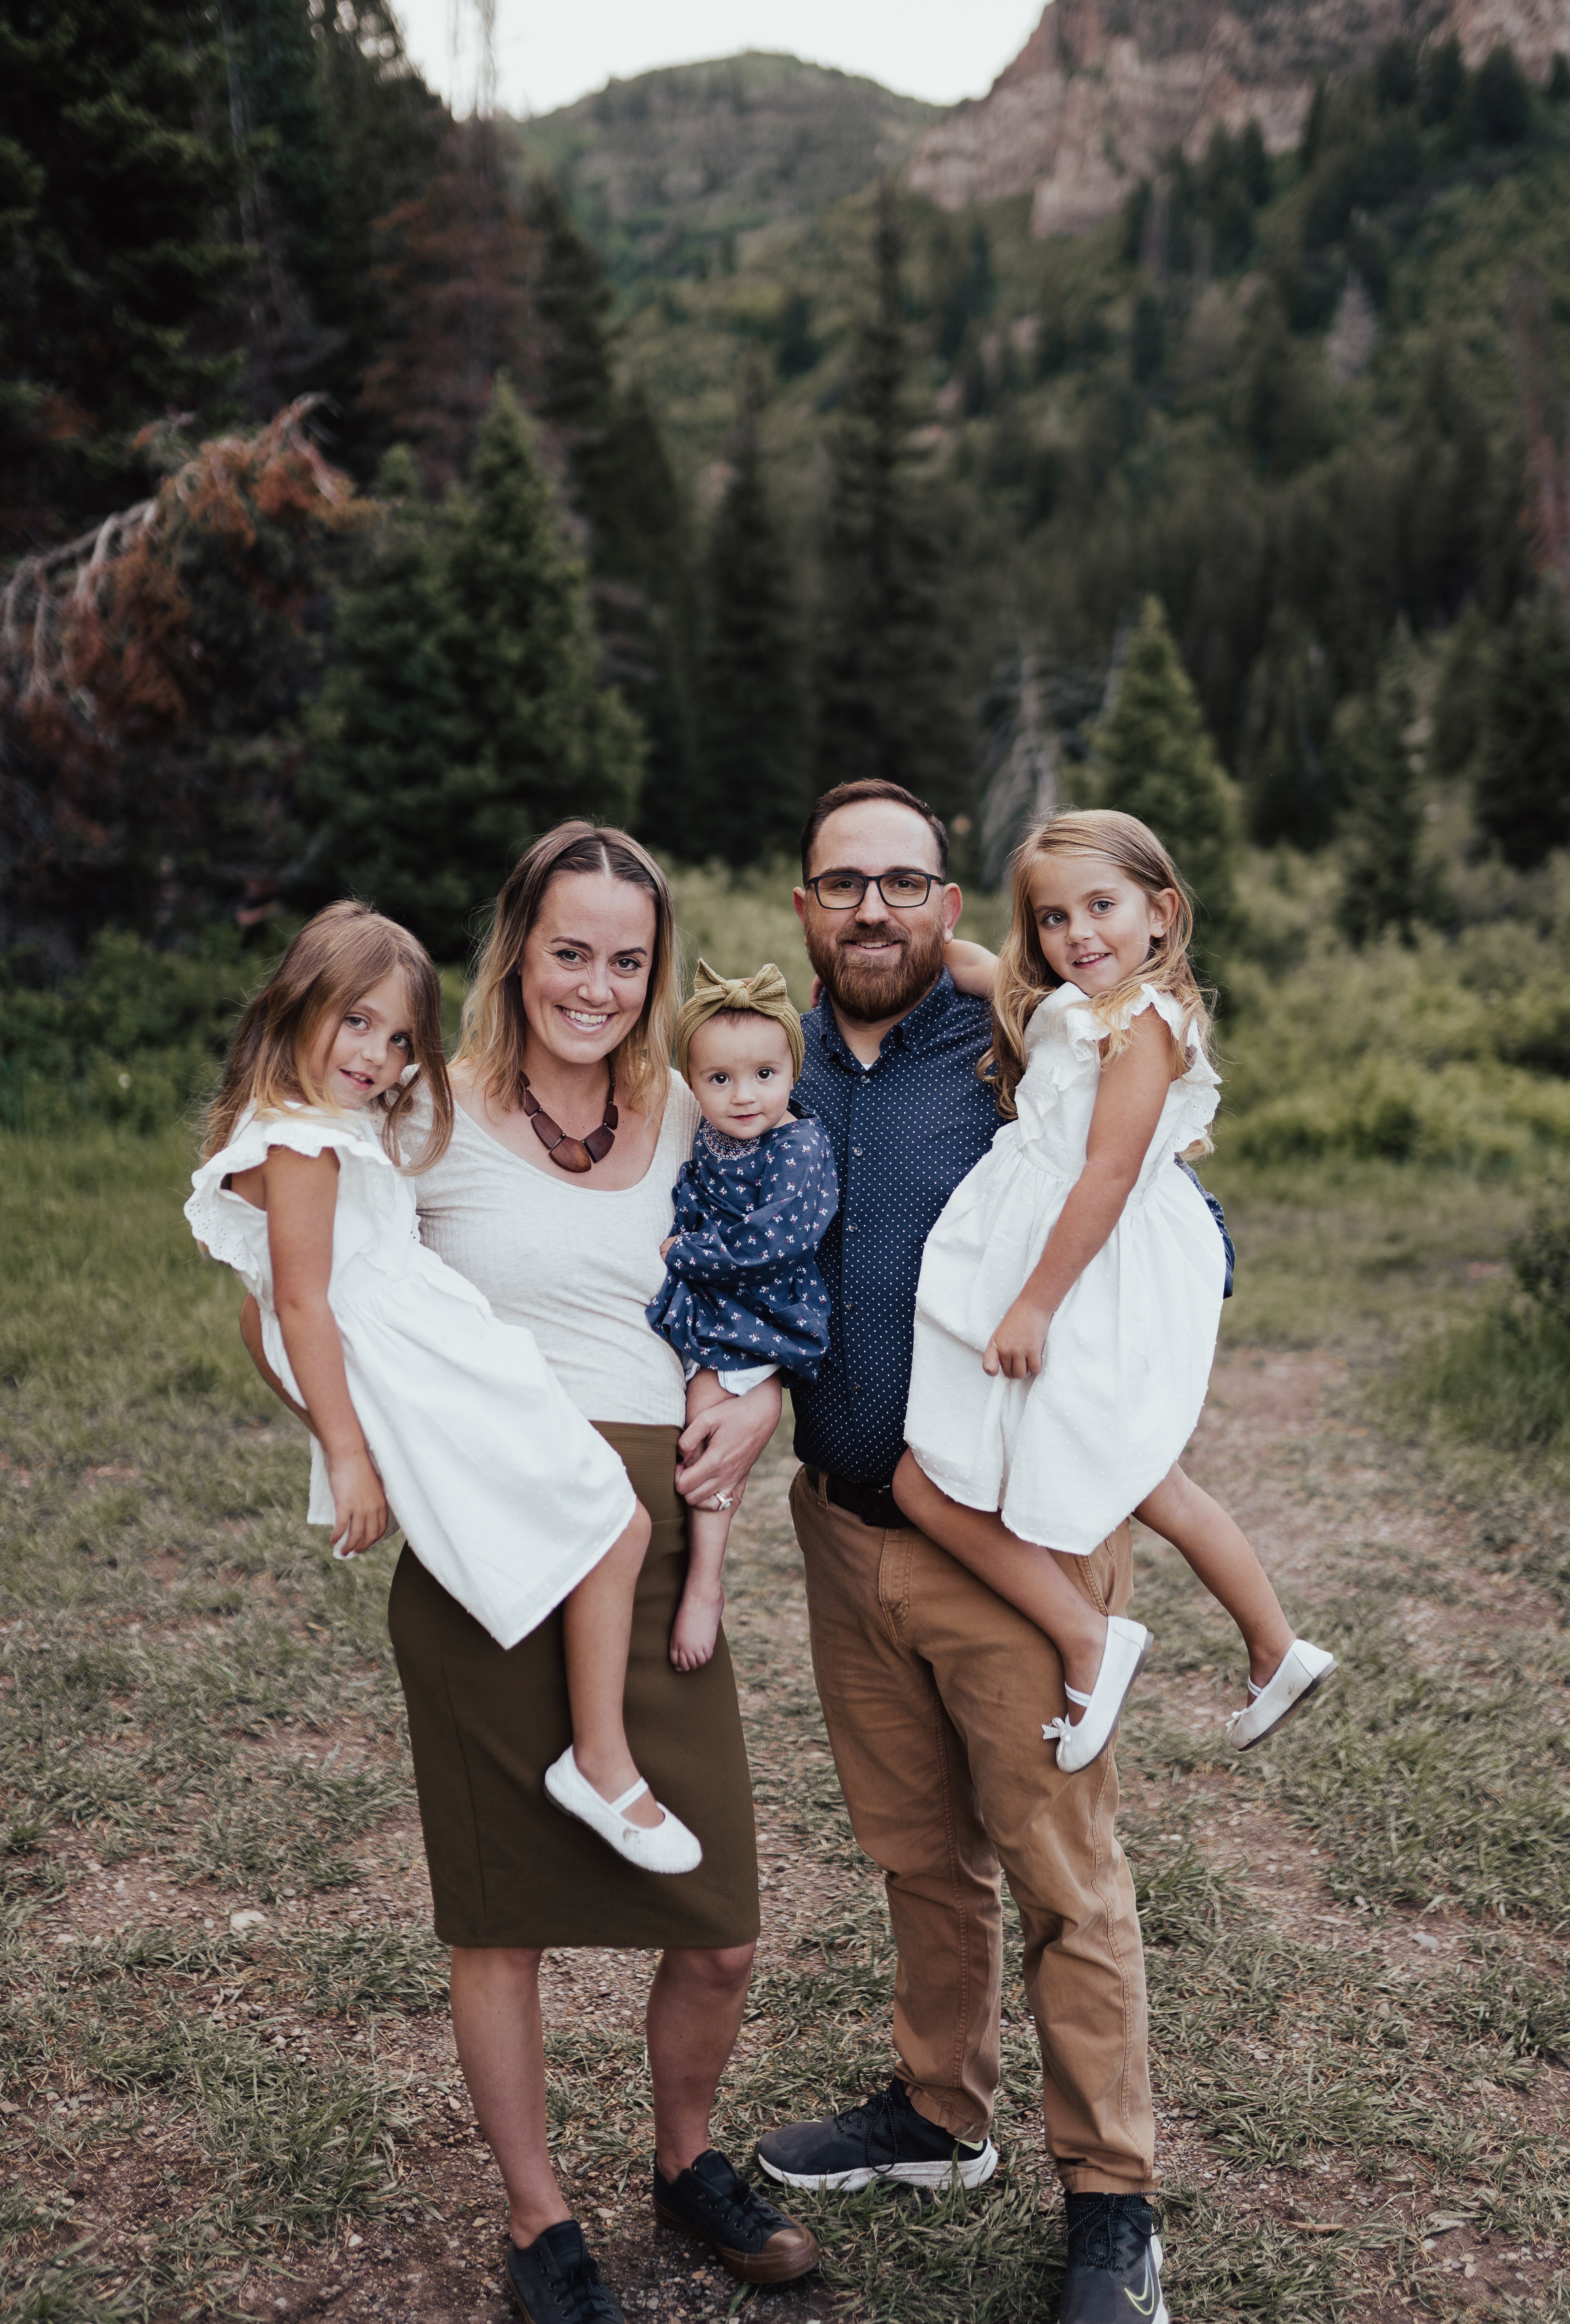 Zach, his wife, and three daughters in the mountains of Utah